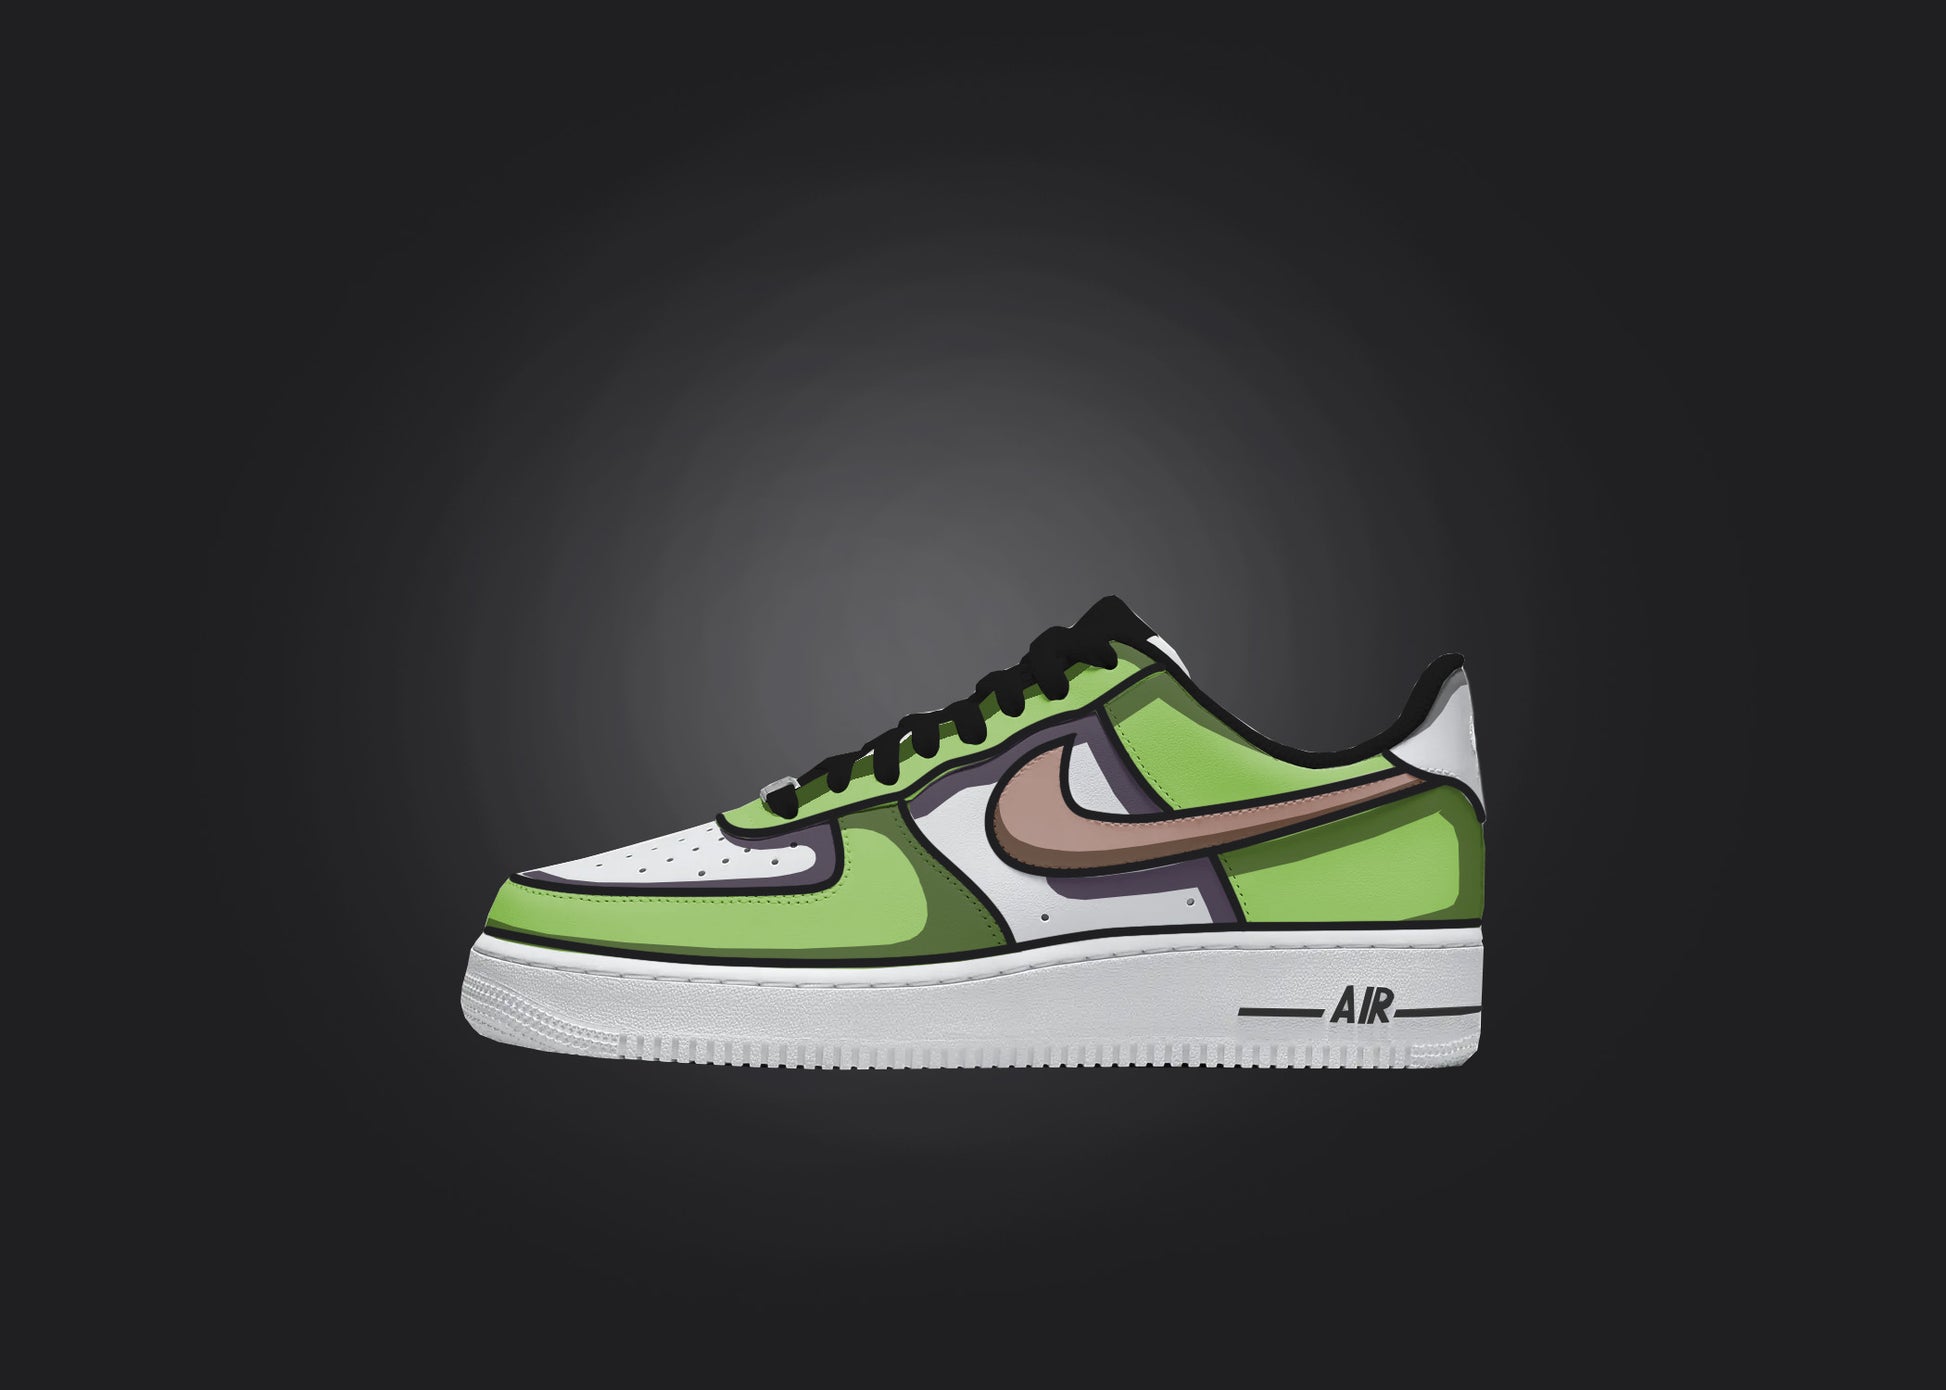 Solo Custom Air Force 1 sneaker in green and brown, set against a black backdrop to highlight the intricate cartoon shading detail.